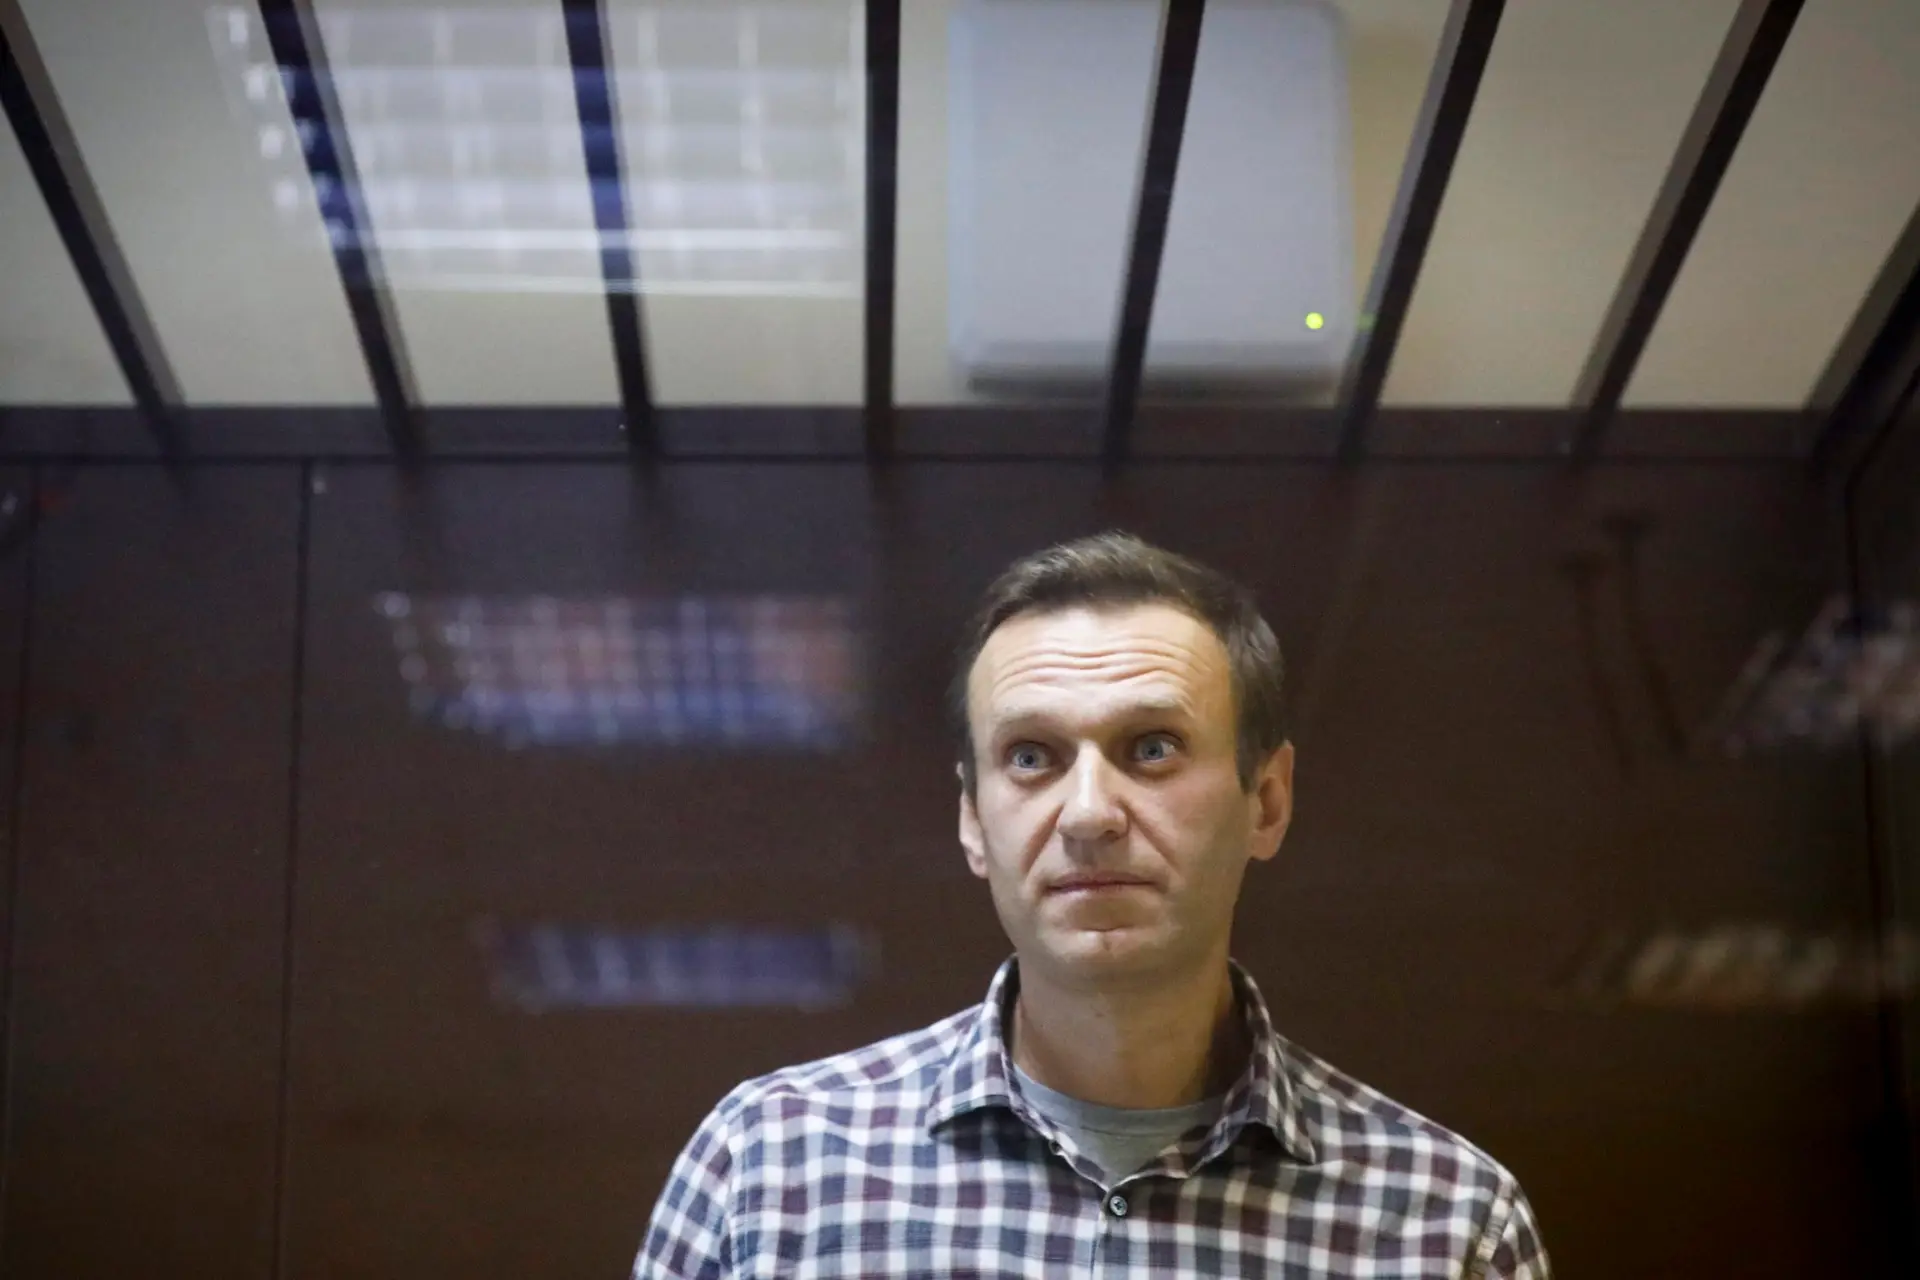 FILE – In this Feb. 20, 2021, file photo, Russian opposition leader Alexei Navalny stands in a cage in the Babuskinsky District Court in Moscow, Russia. Russia is holding three days of voting and there’s no expectation that United Russia, the party devoted to President Vladimir Putin, will lose its dominance in the State Duma. The main question is whether the party will retain its two-thirds majority that allows it to amend the constitution. Another question is whether the Smart Voting strategy devised by Navalny will prove viable against United Russia. (AP Photo/Alexander Zemlianichenko, File)